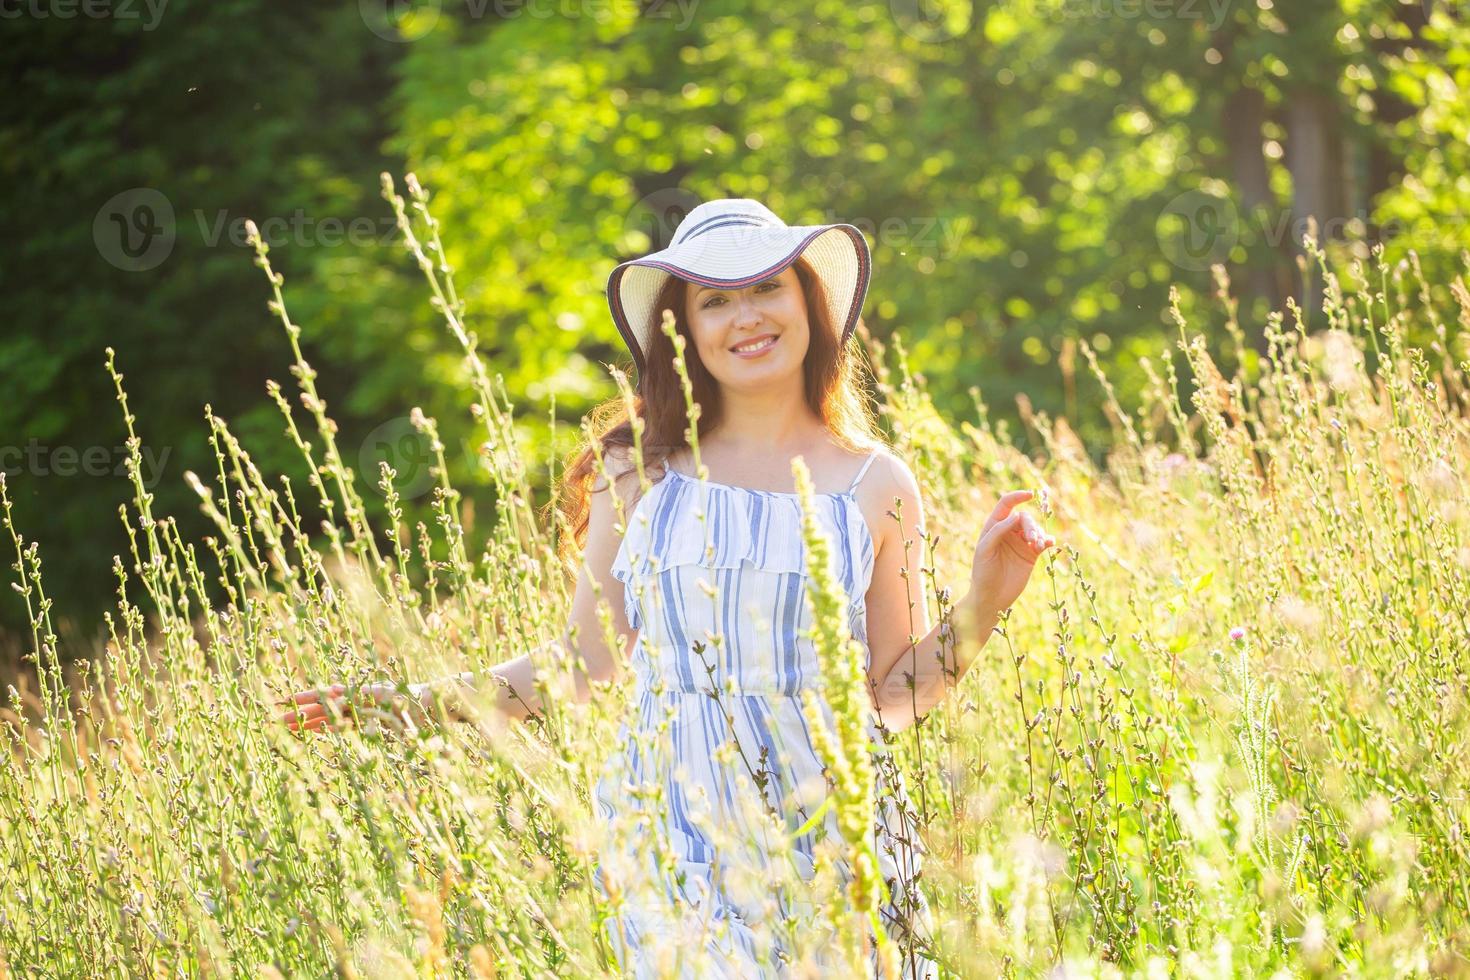 Happy young woman with long hair in hat and dress walking through the summer forest on a sunny day. Summer joy concept photo